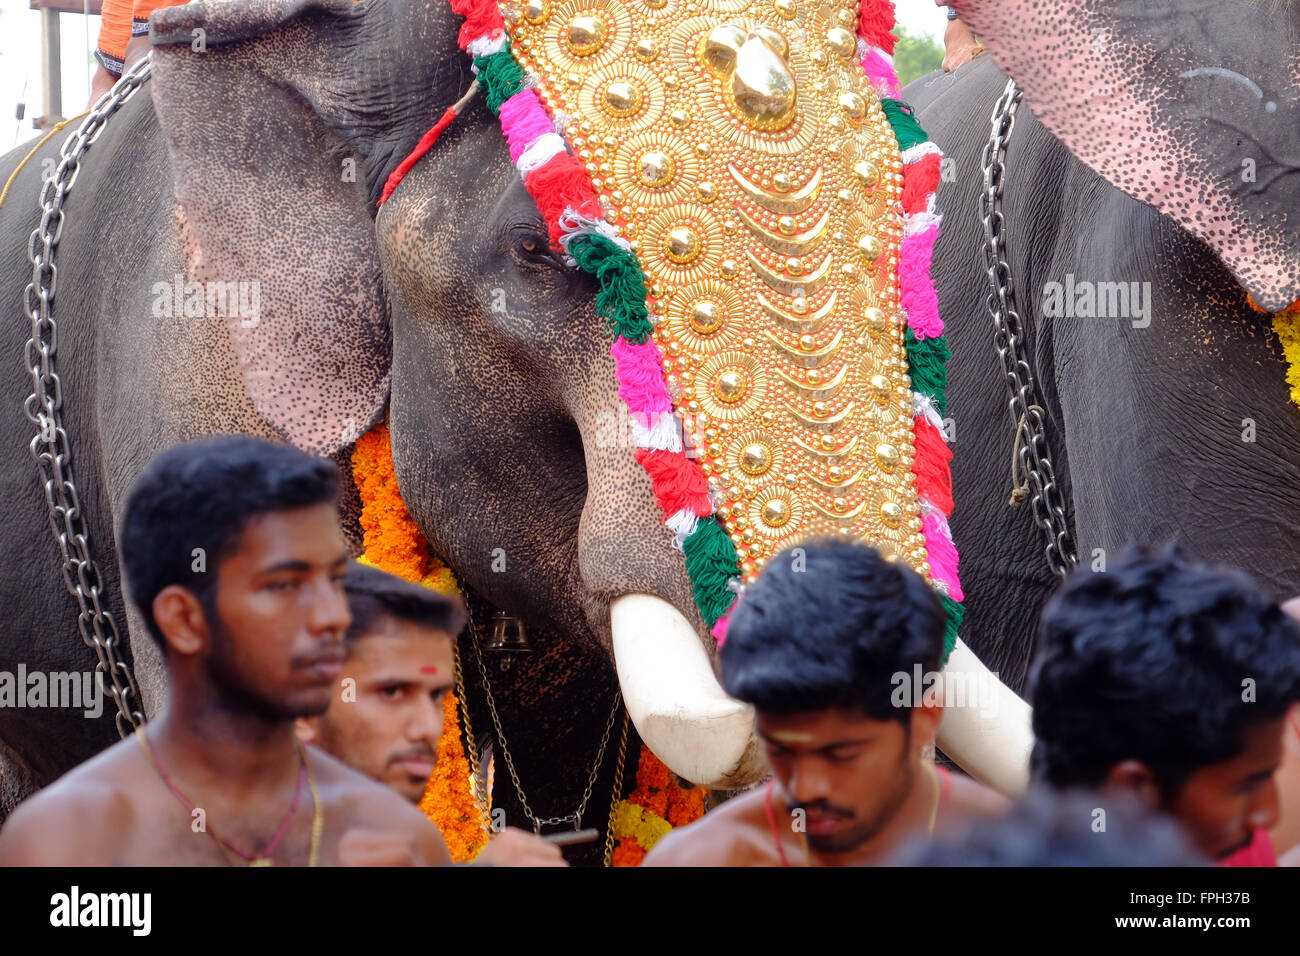 Temple elephants at a festival in Kerala, South India Stock Photo